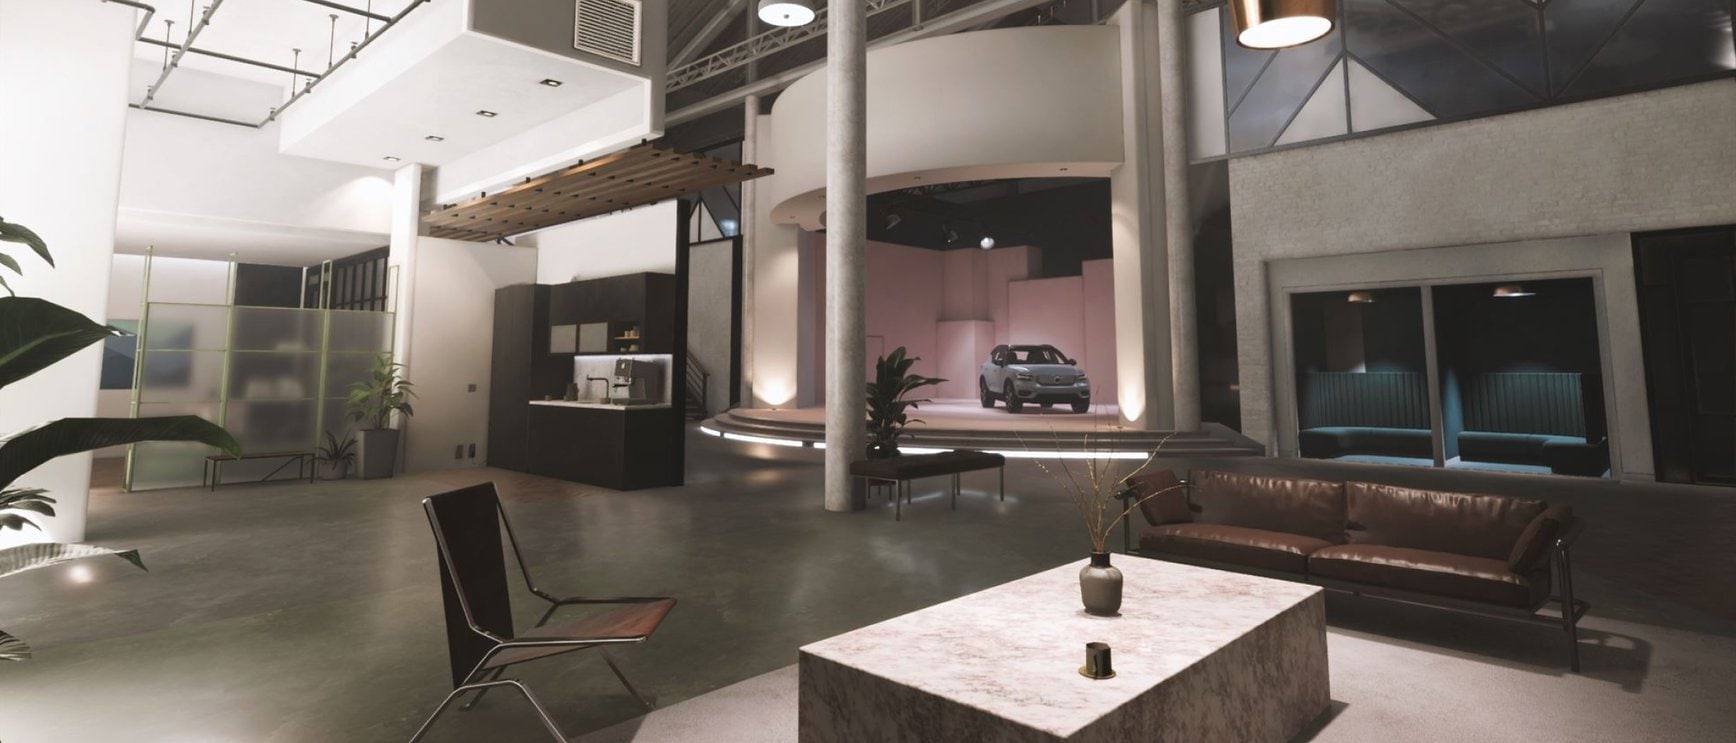 An industrial office with a car model on a small stage.